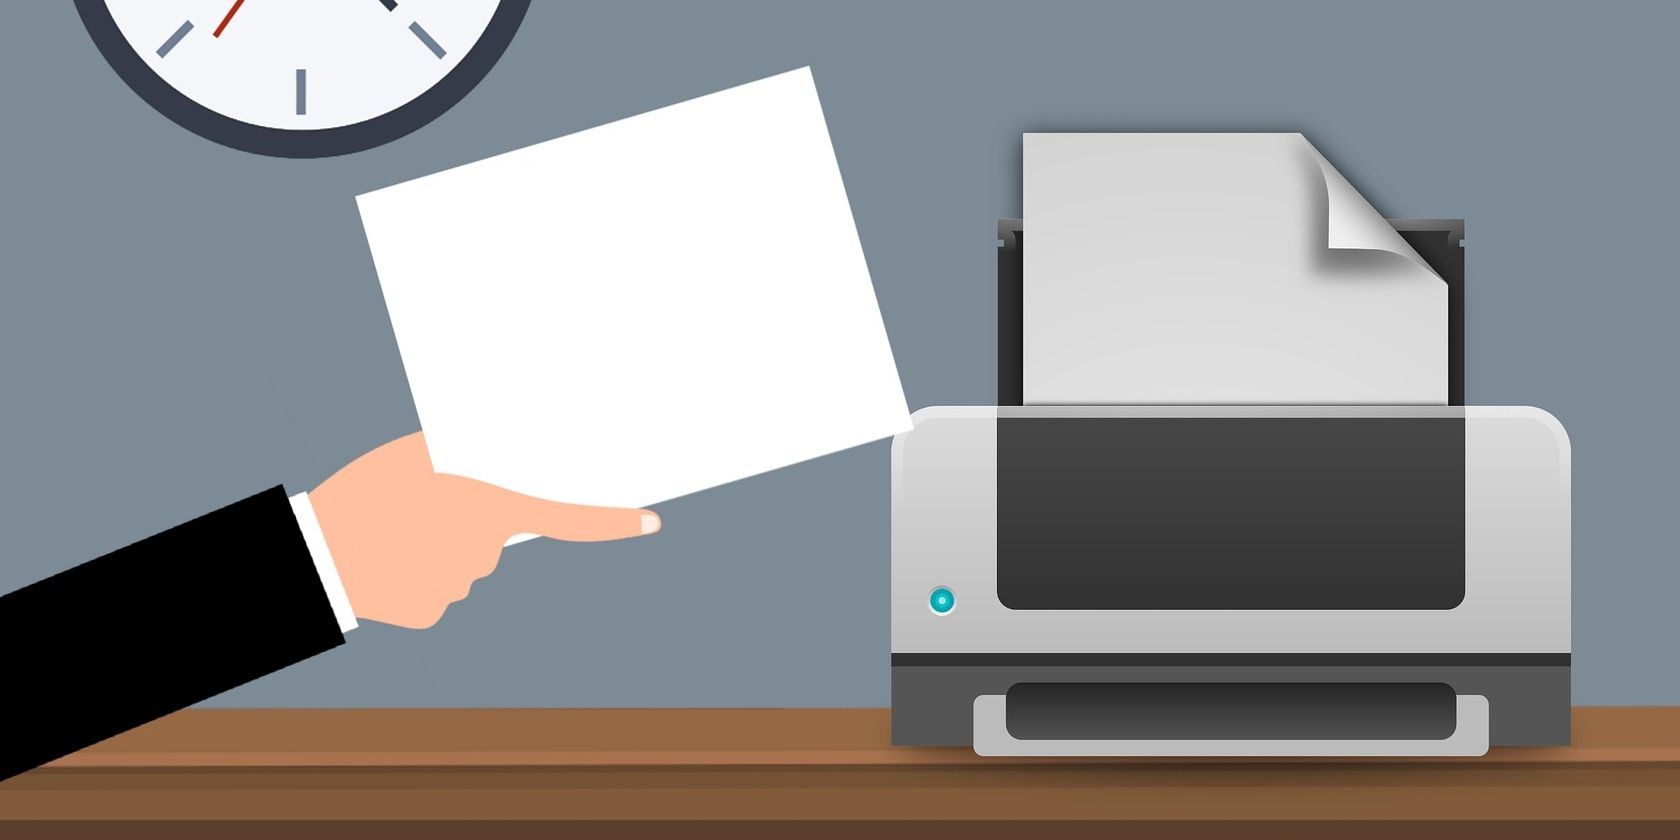 Illustration of a hand holding a paper next to a printer